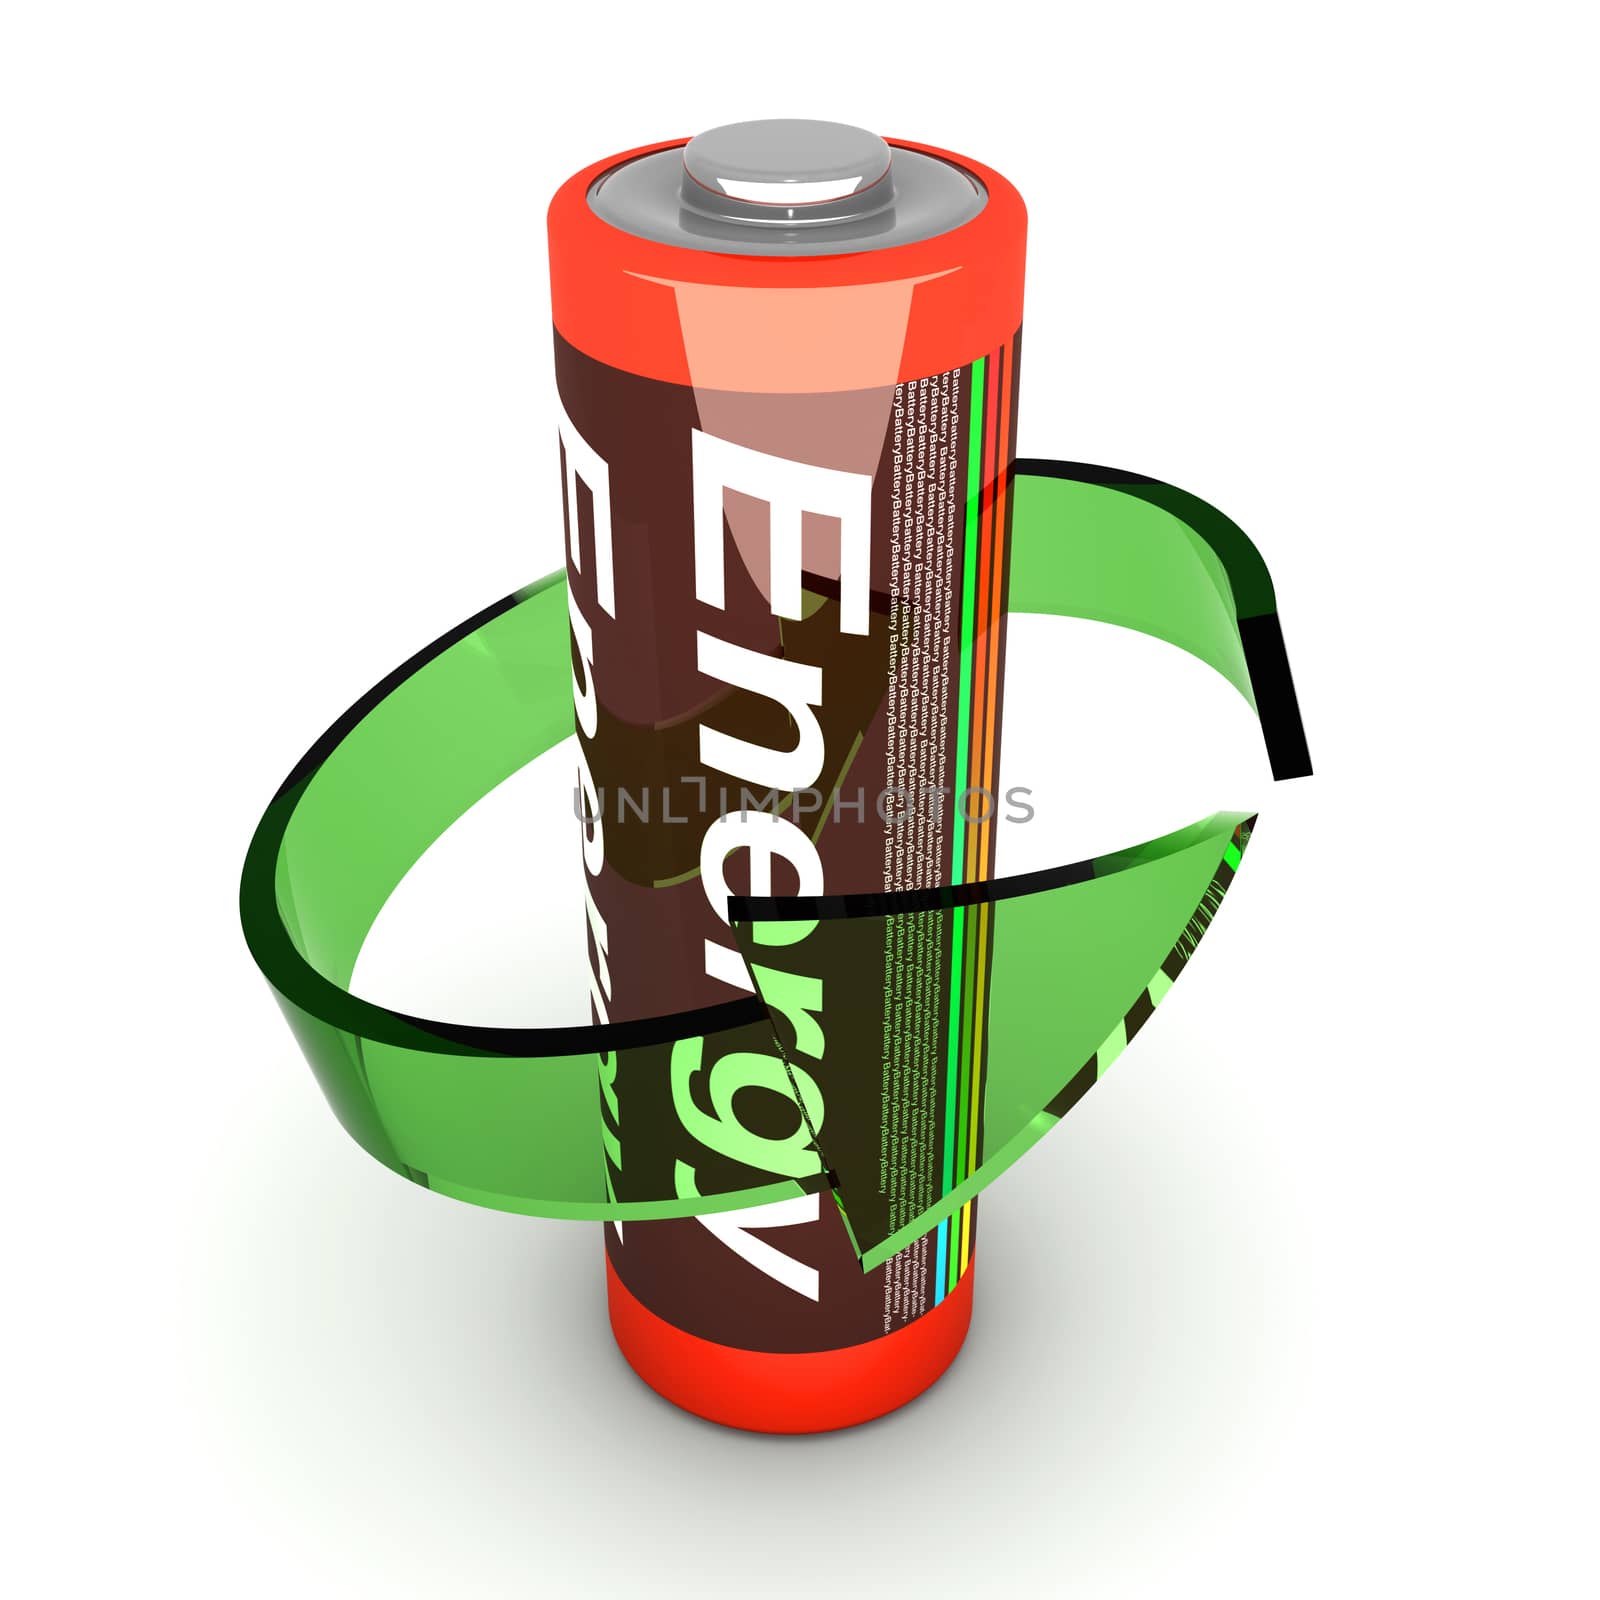 3D rendered Illustration. Isolated on white. An AA Battery.